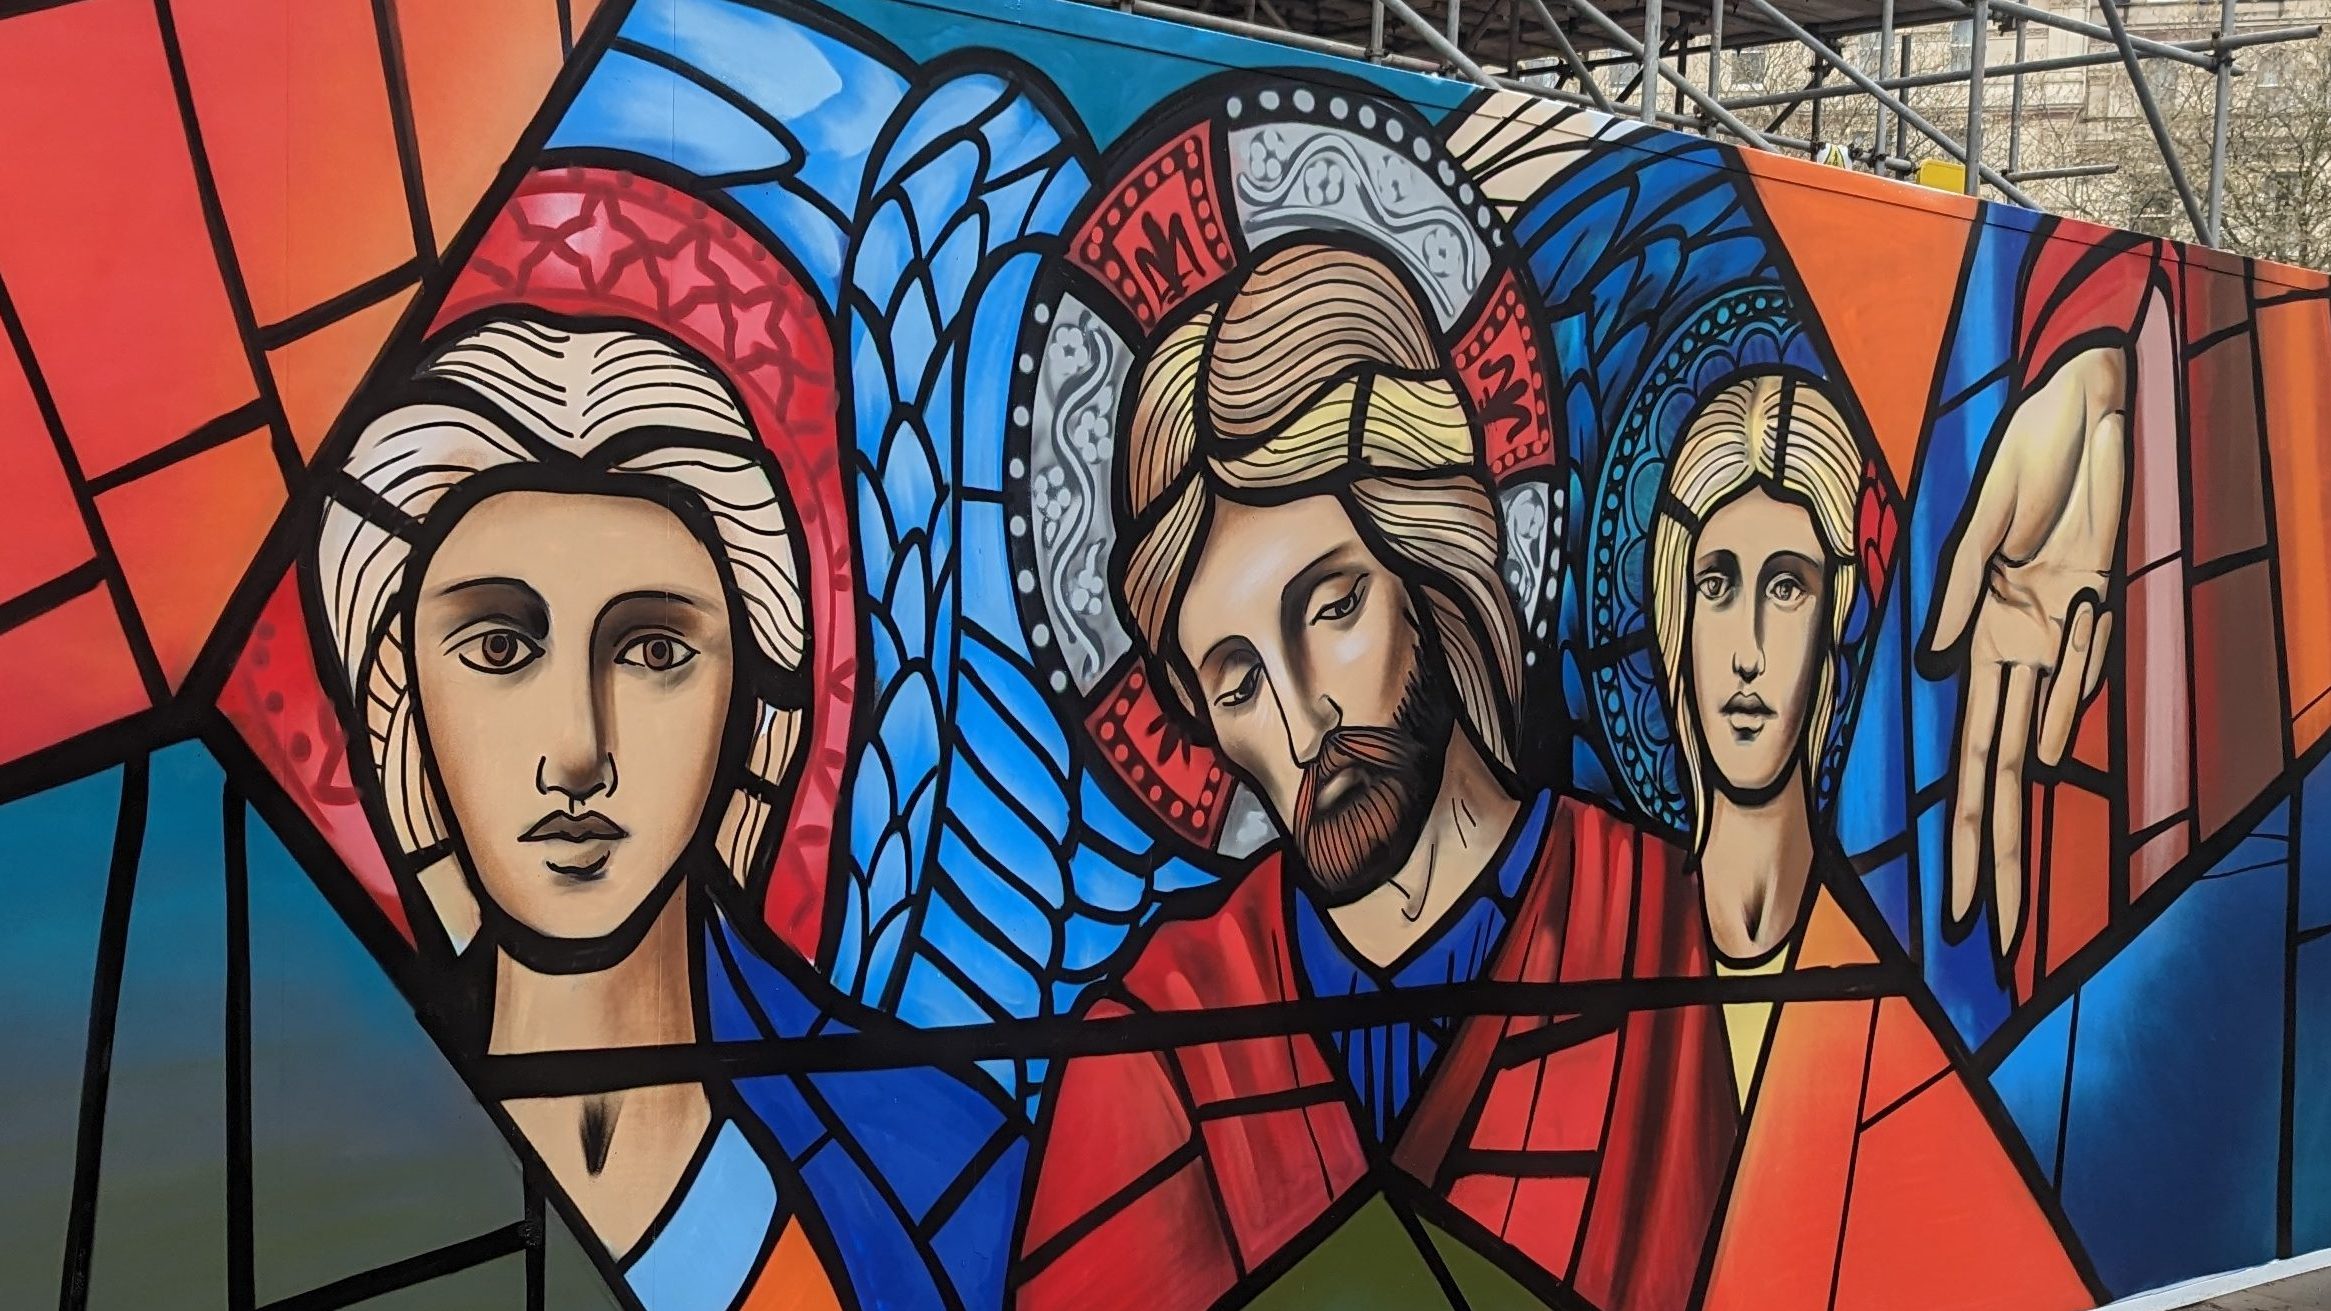 A piece of graffiti street art depicting images from The Ascension window by Edward Burne-Jones and William Morris.  In the centre of the image is Jesus, with an angel on either side.